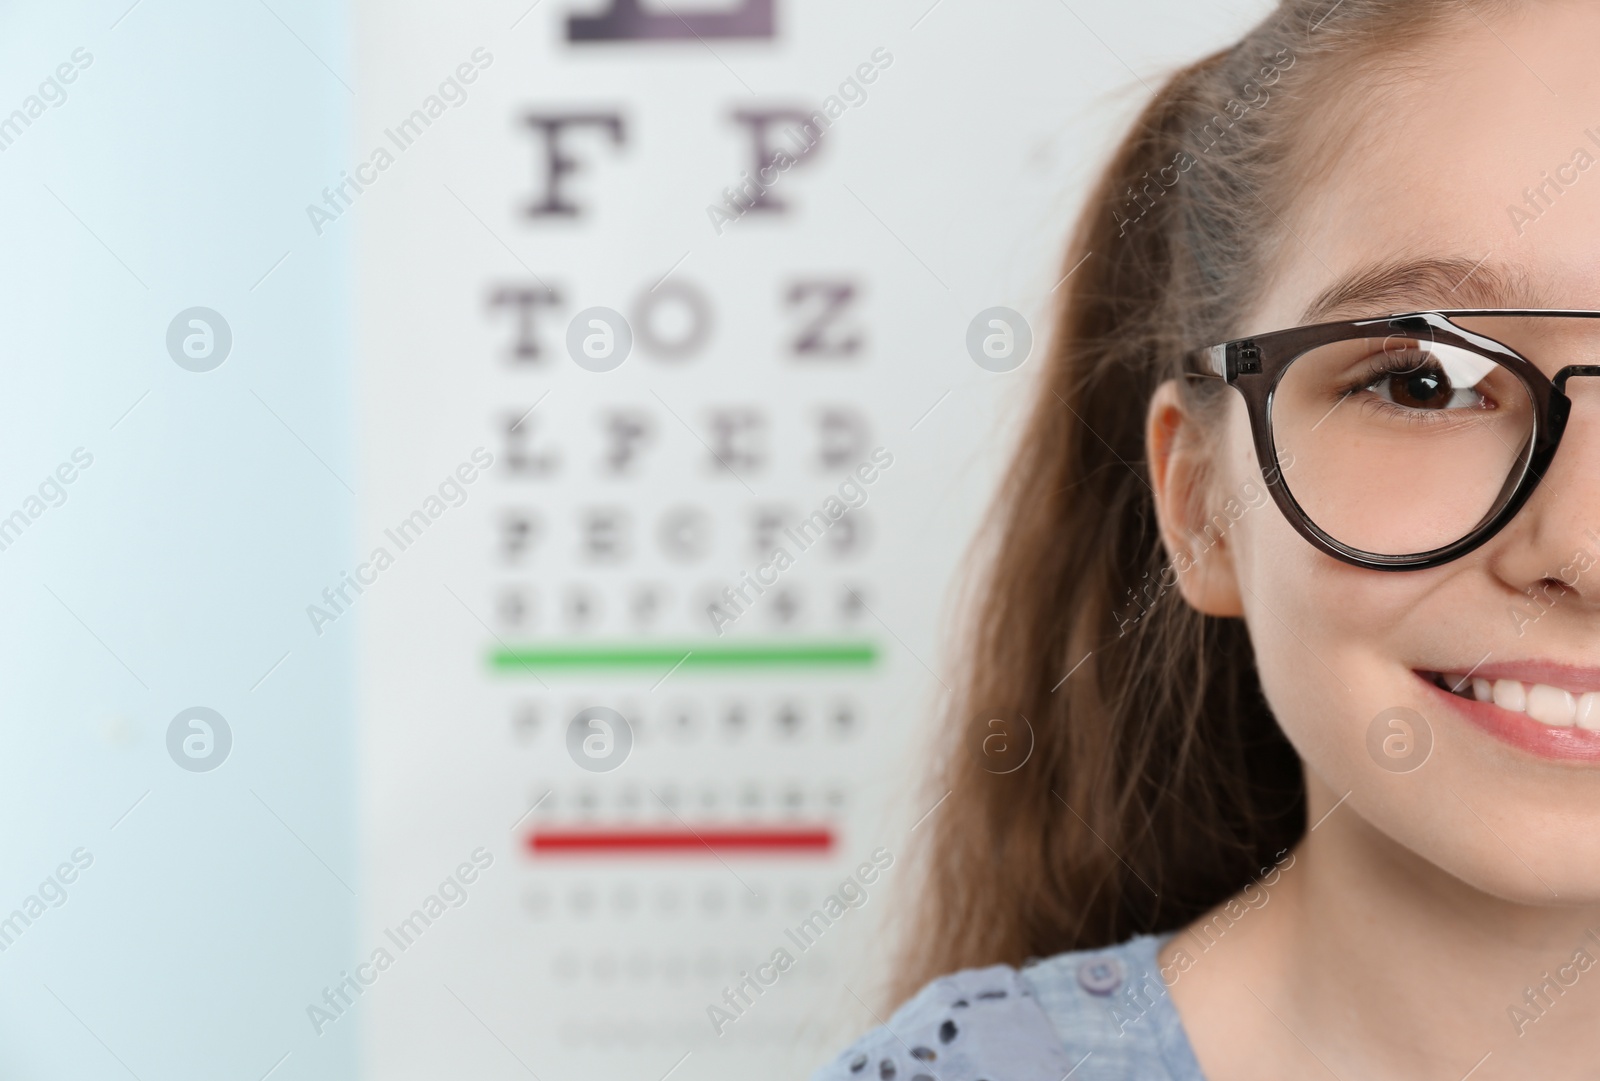 Photo of Cute little girl with eyeglasses in ophthalmologist office. Focus on face